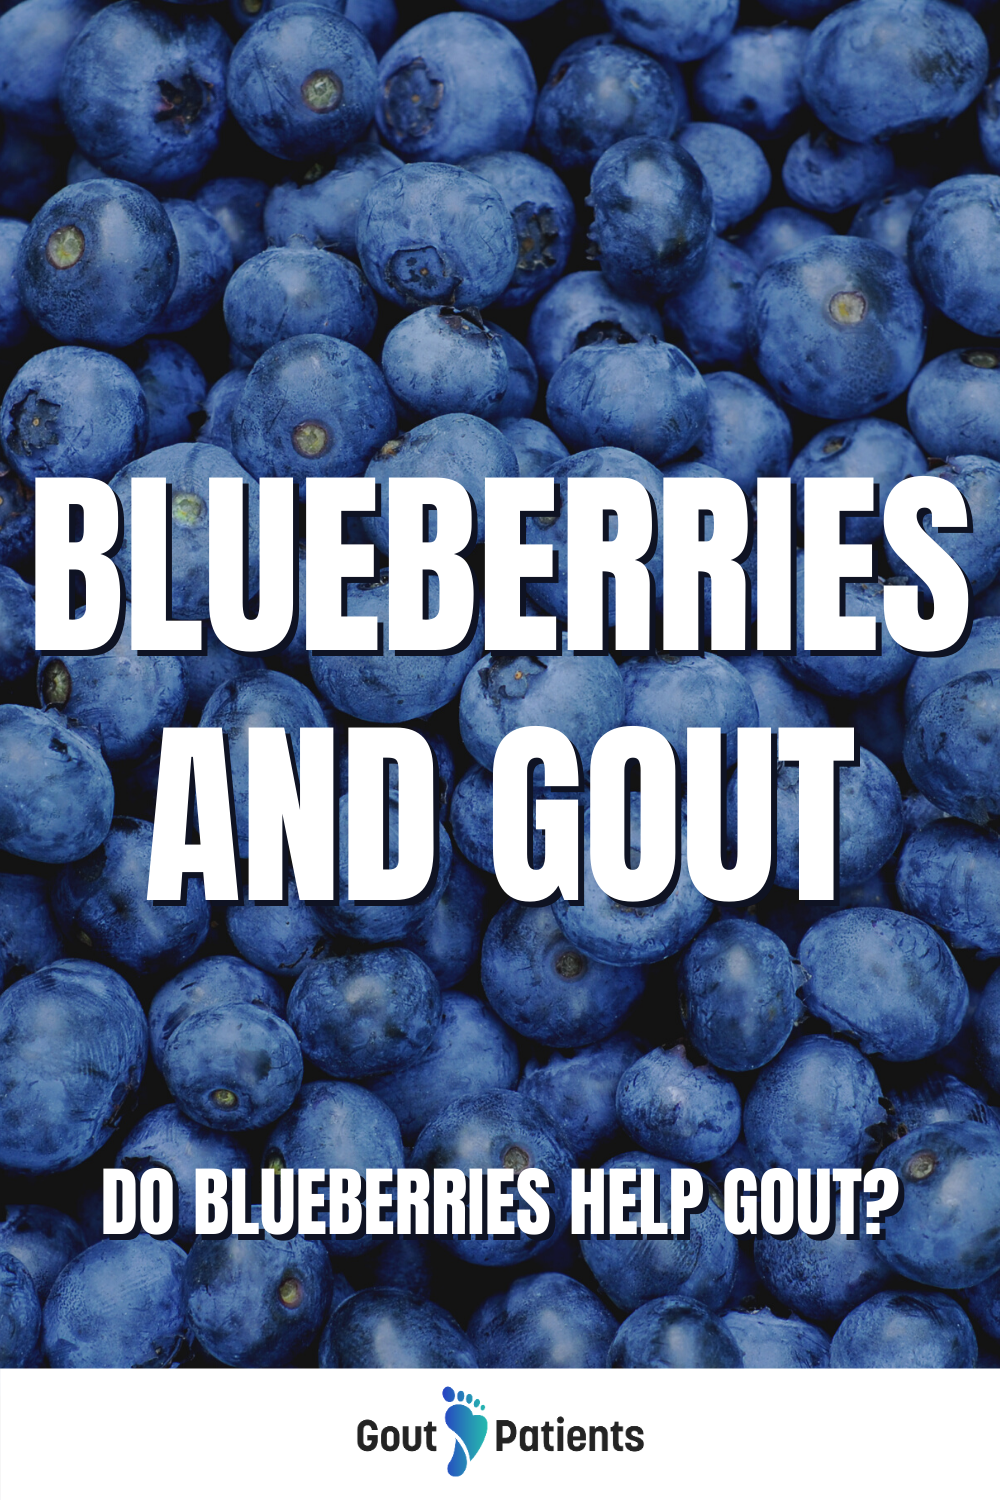 Blueberries and gout in 2020